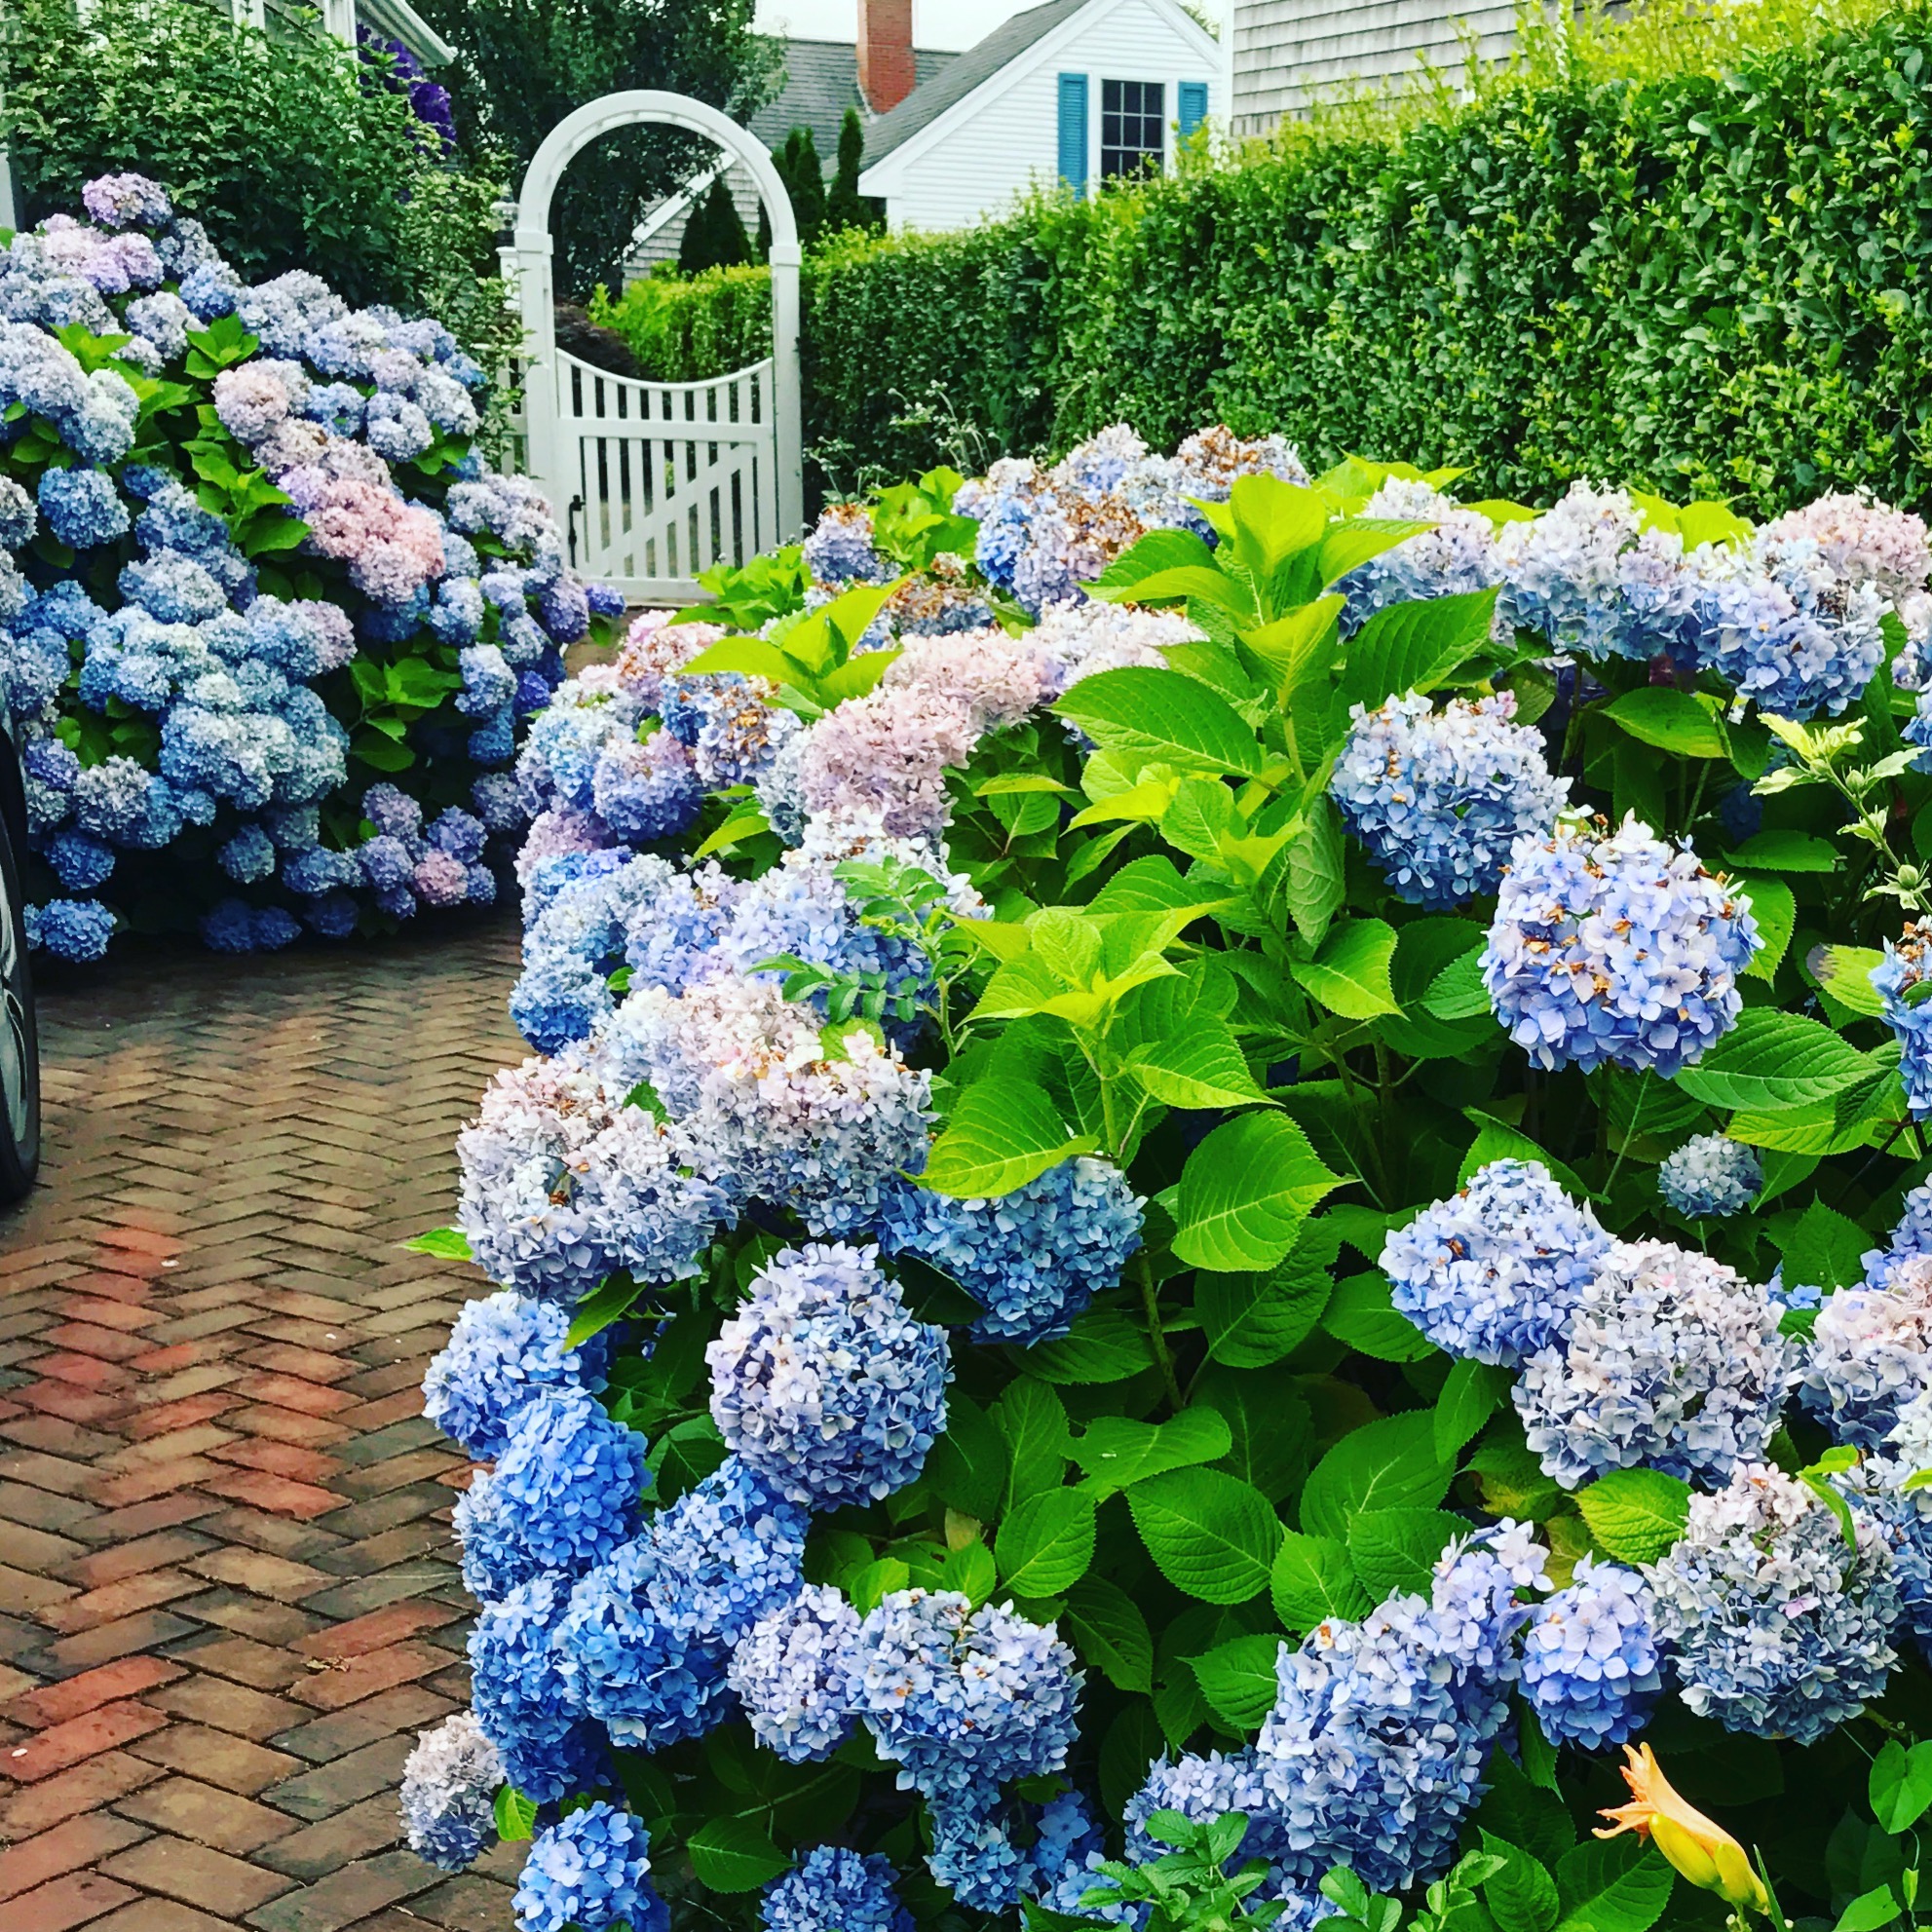 Nantucket home photo by christina dandar for The Potted Boxwood 21